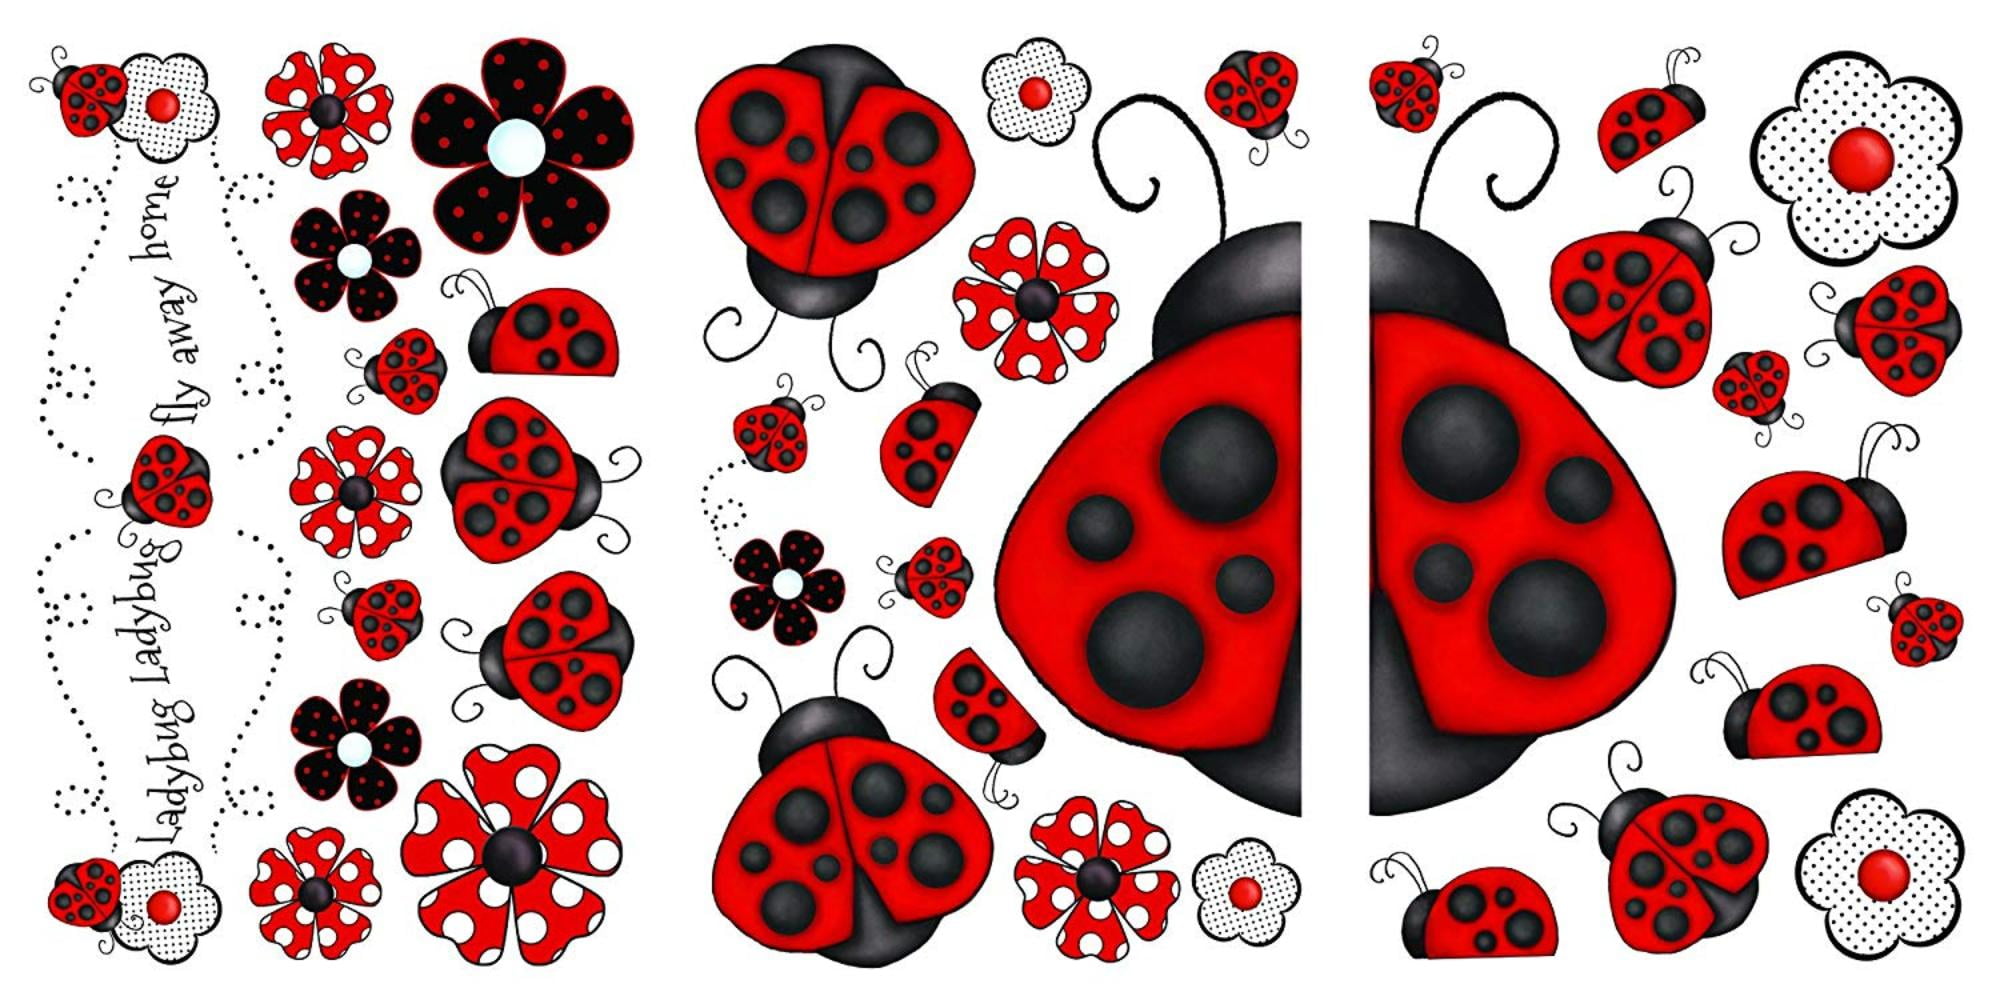 LADYBUG LADYBUGS GiaNT WALL DECALS 38 Red White Black Stickers Floral Room Decor 